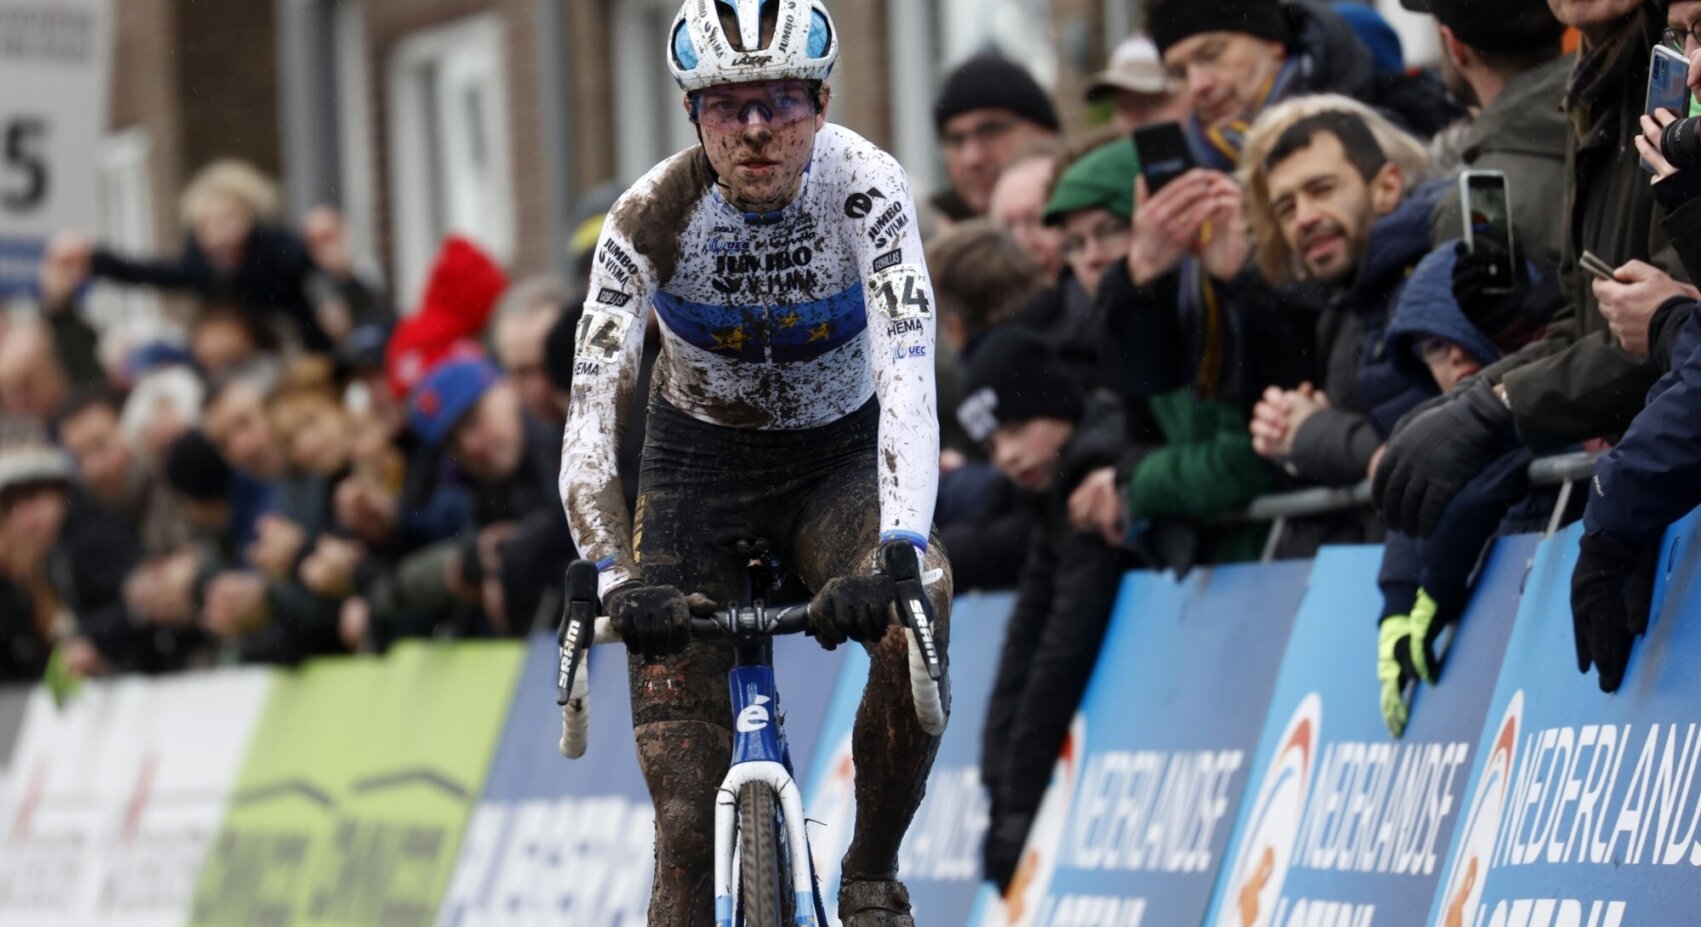 Van Empel finishes third in muddy edition of Dutch championship cyclocross	